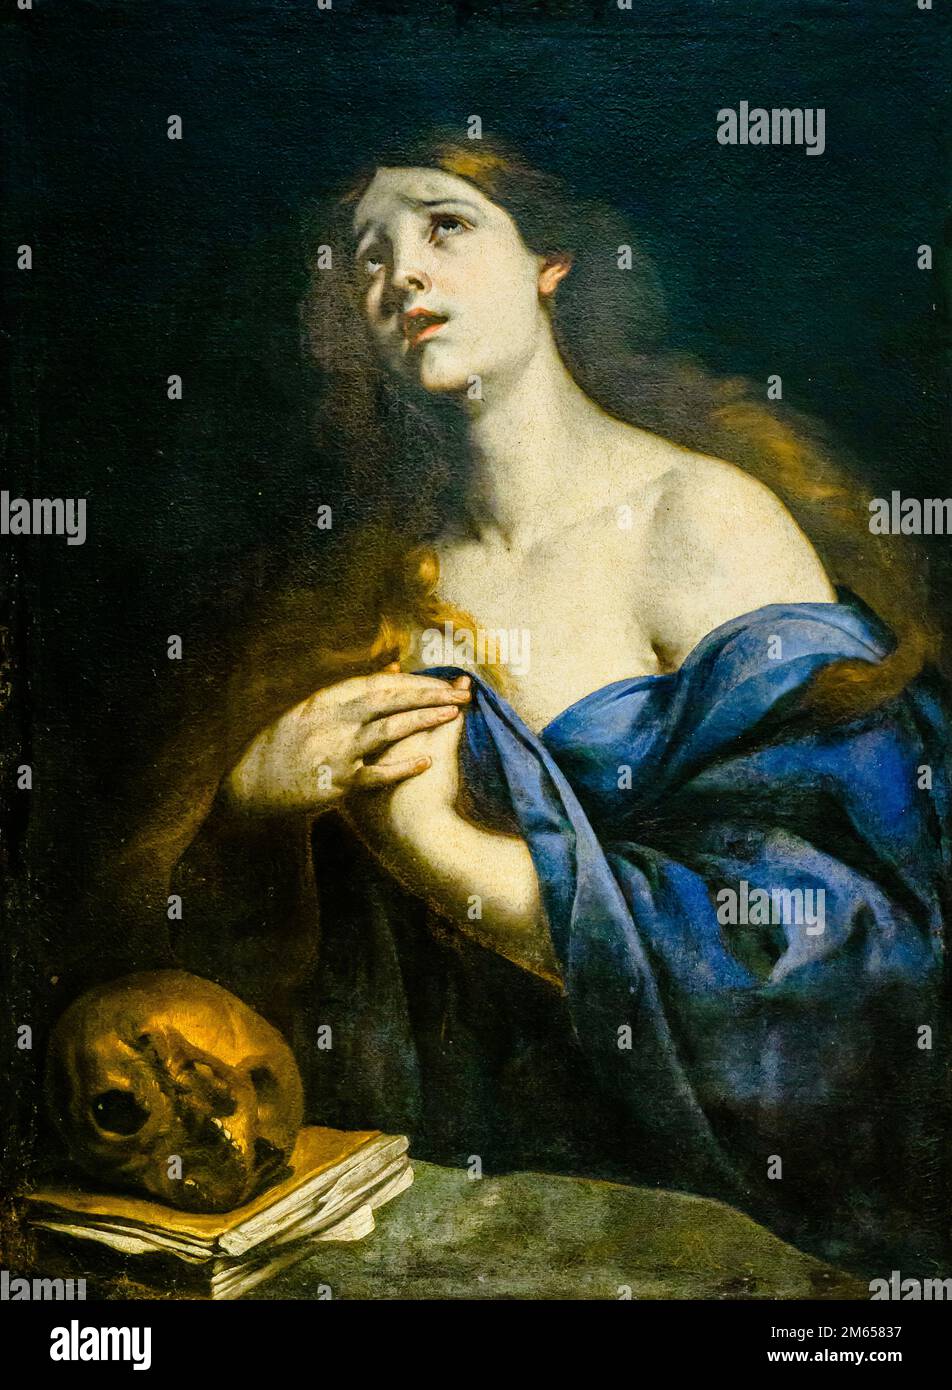 Penitent Magdalene by Andrea Vaccaro (Naples 1605 - 1670) - oil on canvas - Museo regionale Agostino Pepoli - Trapani, Sicily, Italy Stock Photo